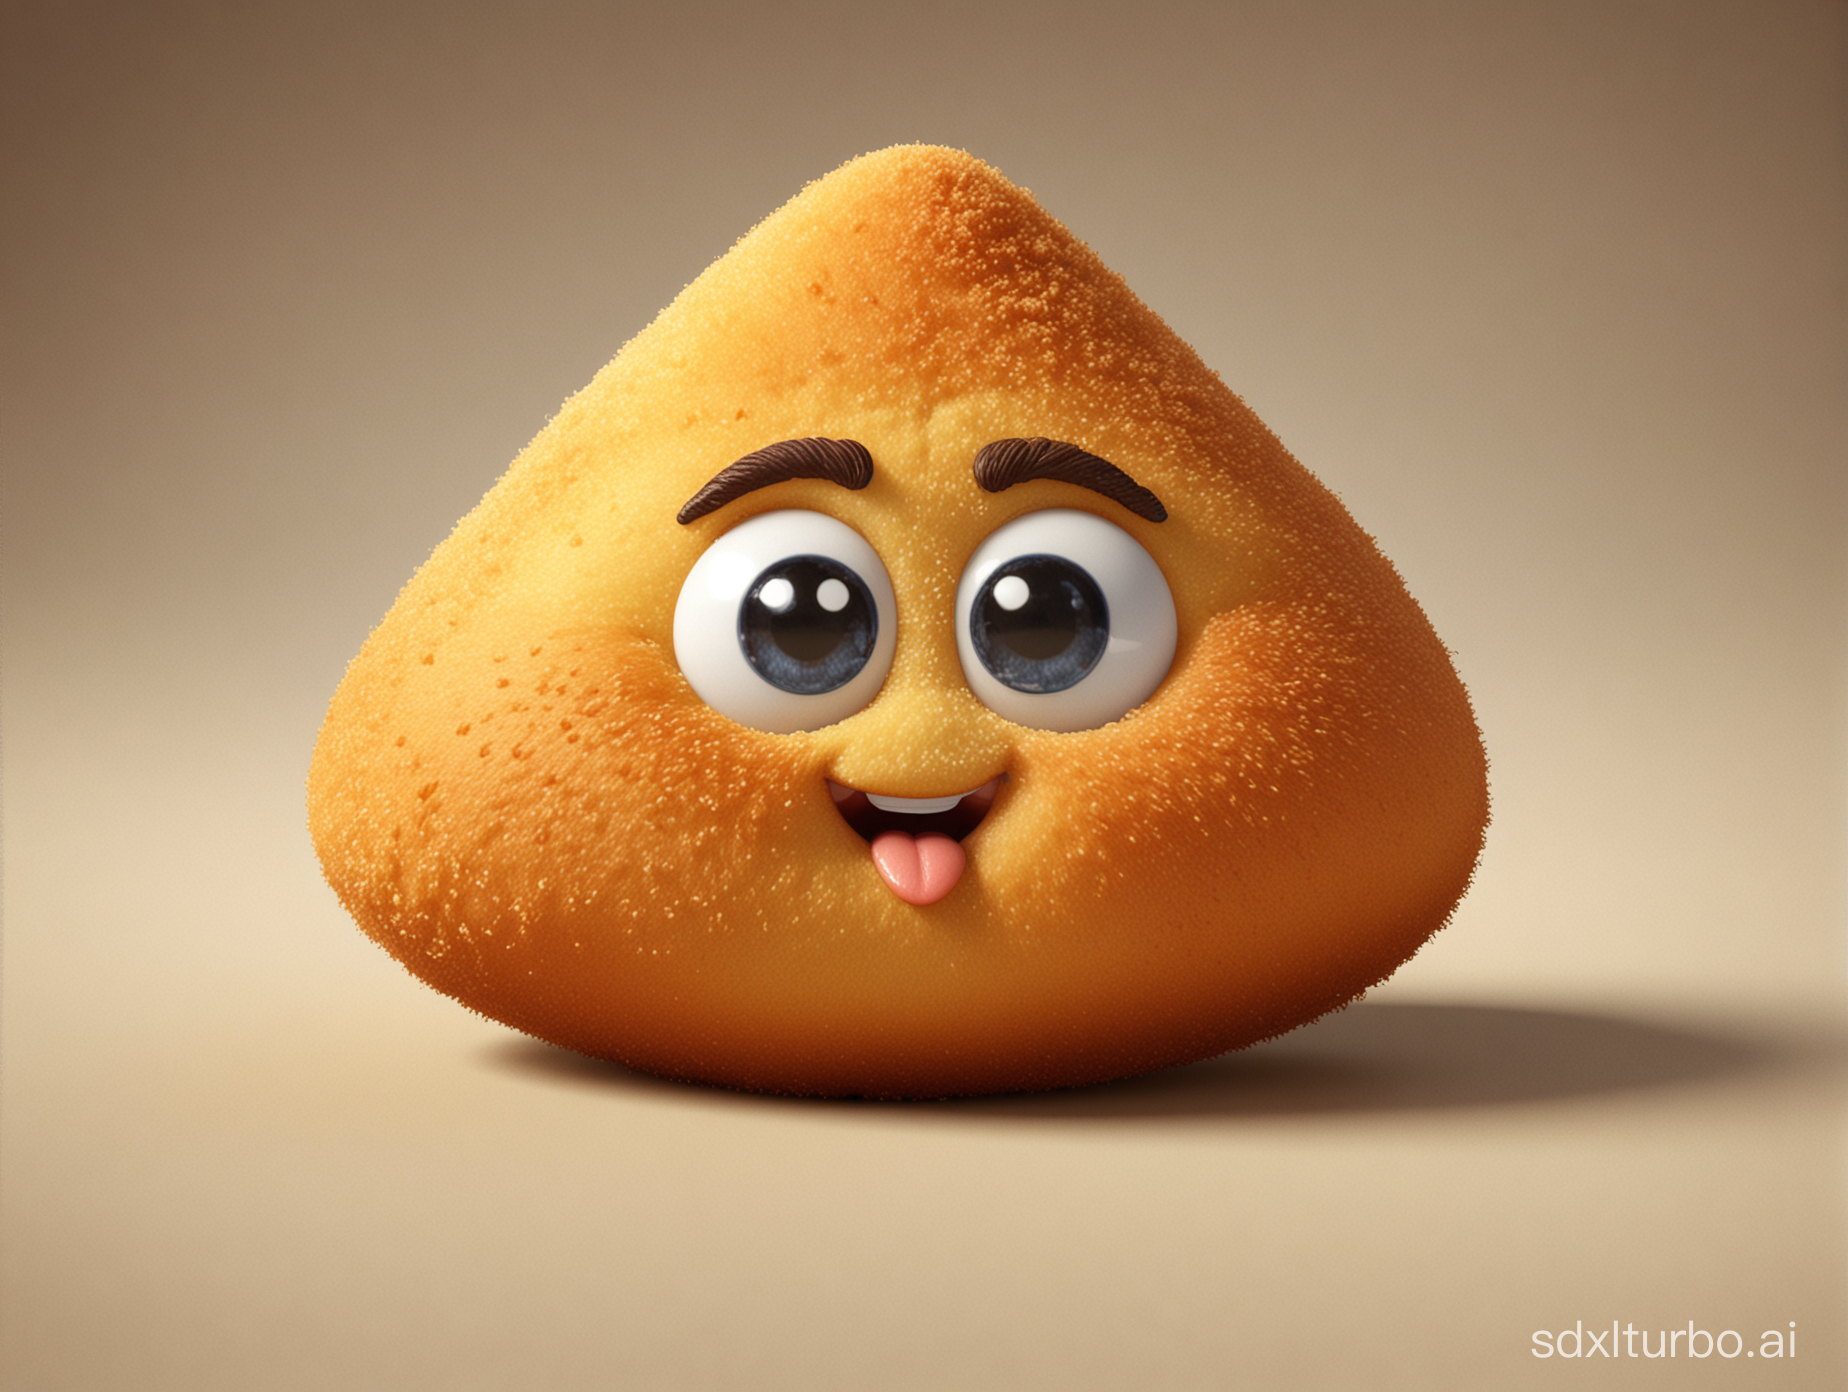 /imagine prompt: generate a 3d hd mascot of a coxinha, with the following attributes: iconic coxinha shape, friendly and engaging character, crispy and golden texture, creamy and flavorful filling, cheerful and inviting facial expression, high quality render with realistic details --ar 4:3 --q 3
